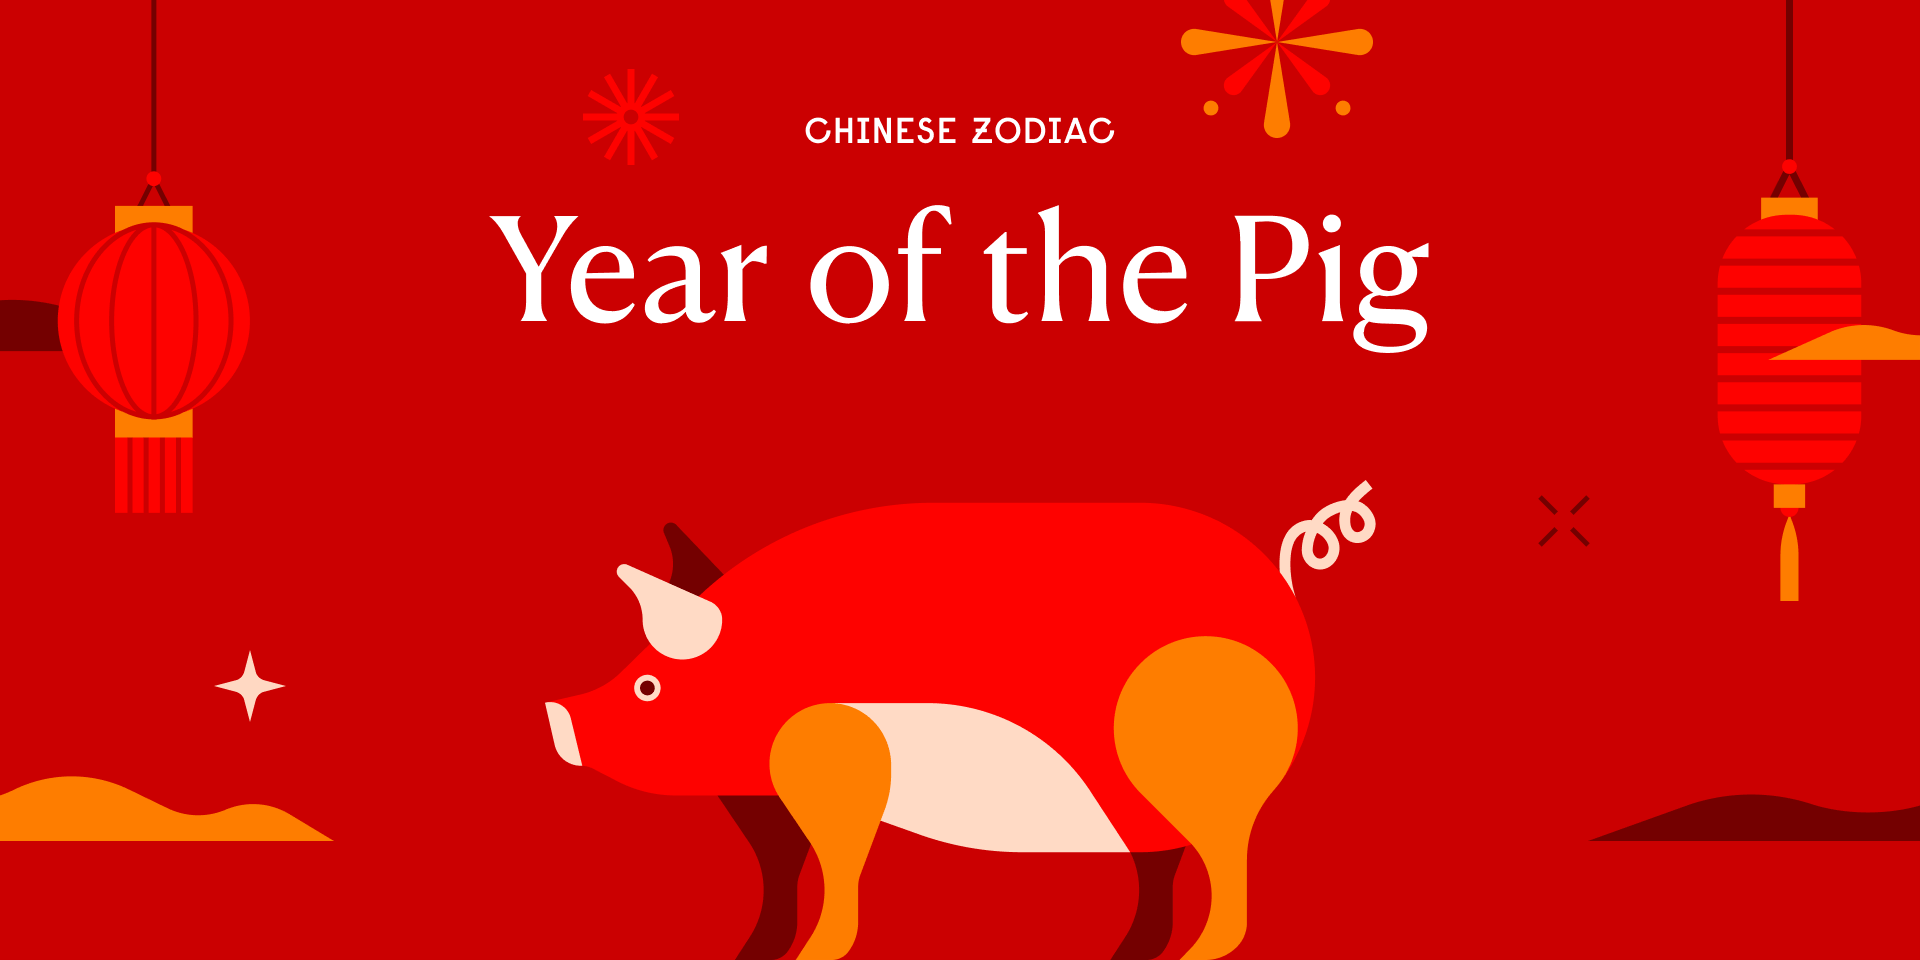 4742 2021 horoscope predictions for those born in the year of pig 1